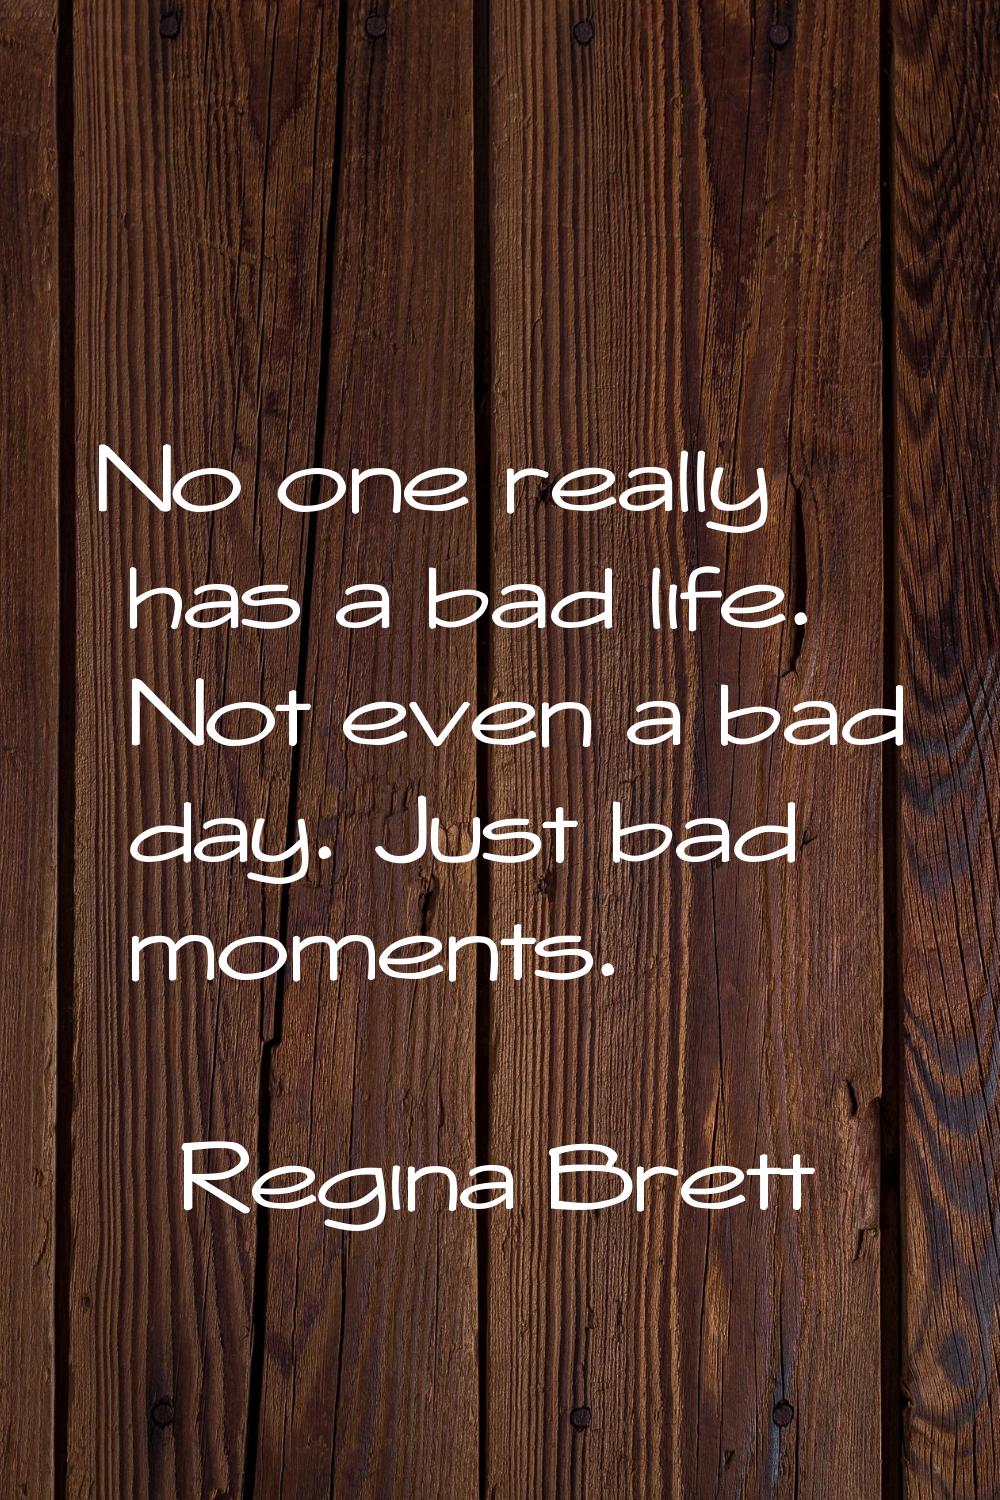 No one really has a bad life. Not even a bad day. Just bad moments.